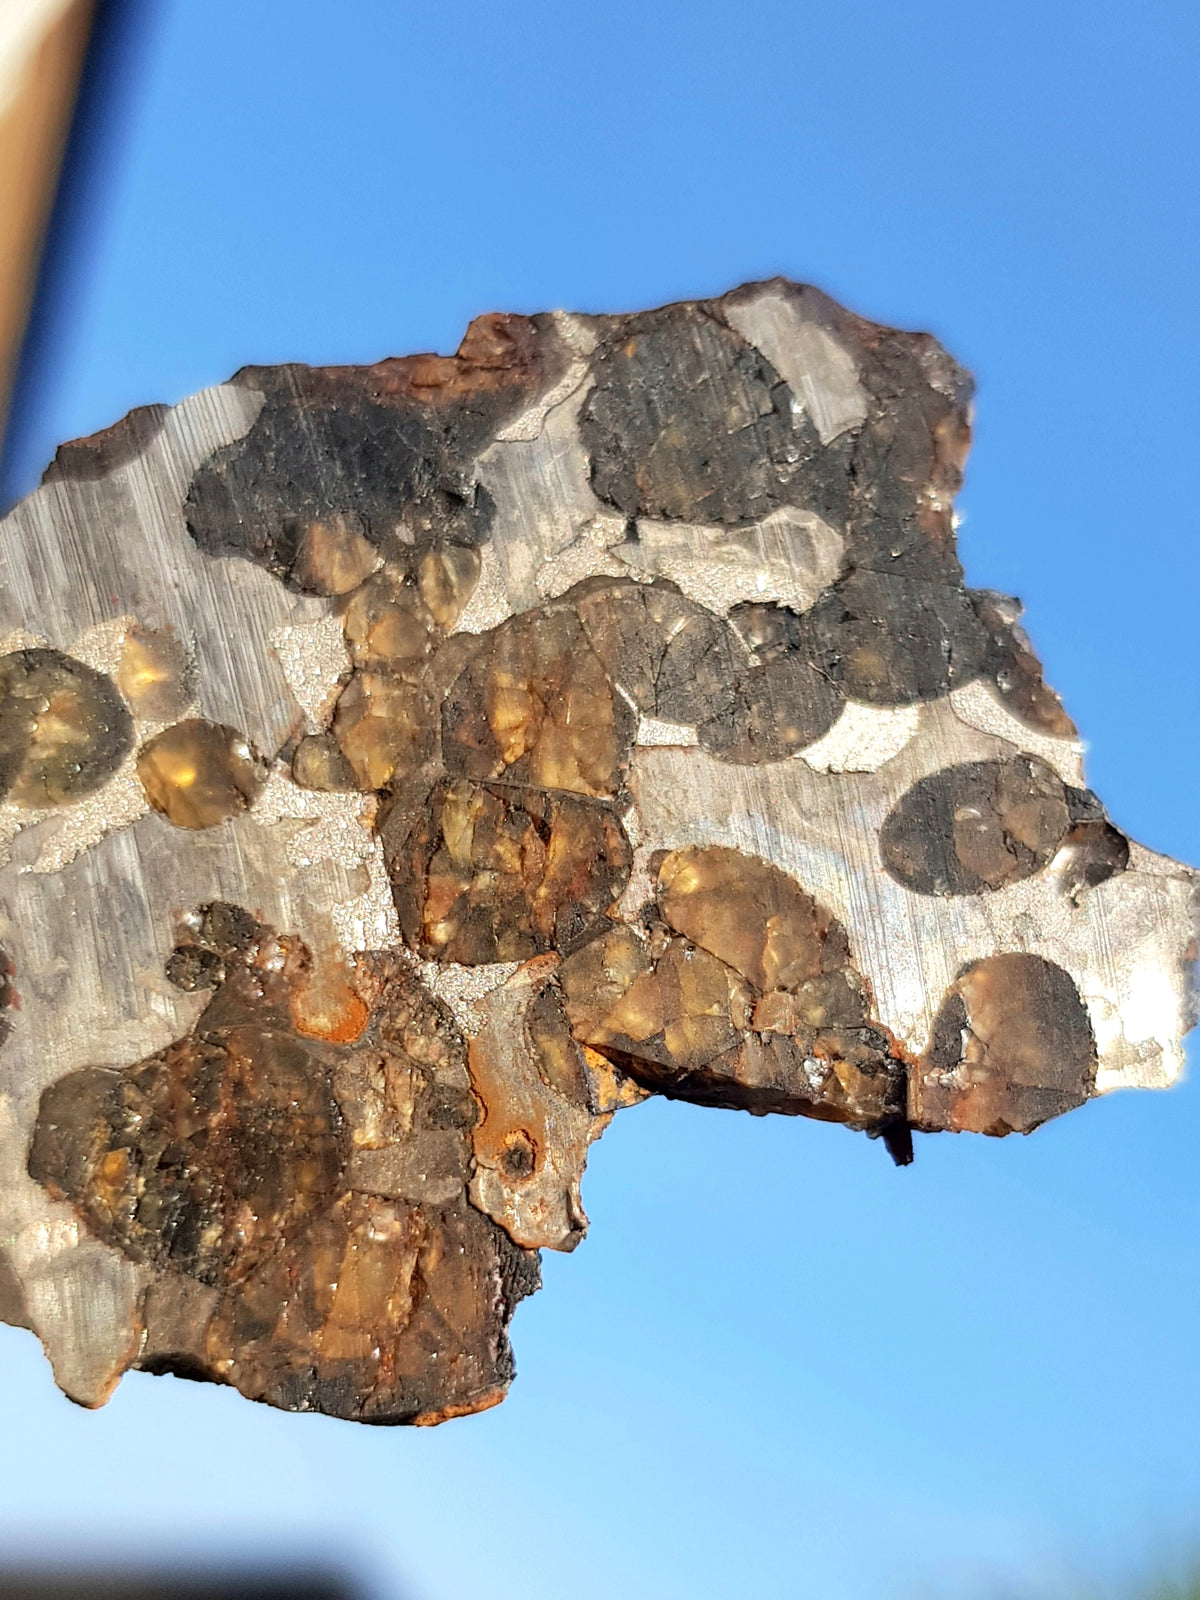 A slice of brenham ( a pallasite) held up to the light. This sample consists o crystals of orange/brown olivine within an iron nickel matrix.